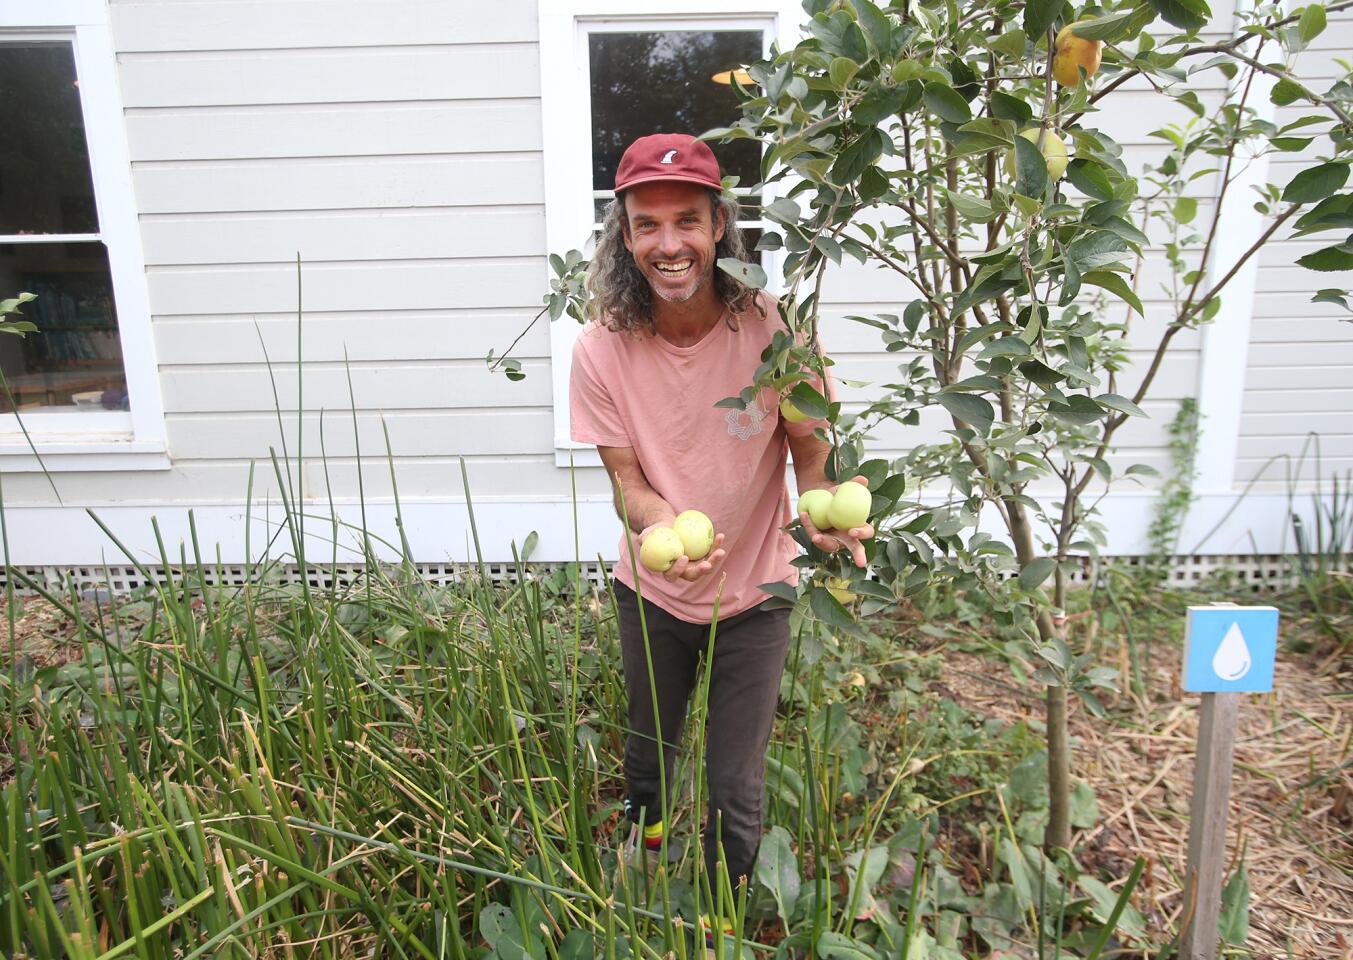 Executive director Evan Marks happily picks apples on one of the learning landscapes at The Ecology Center which celebrates its 10th anniversary in San Juan Capistrano.